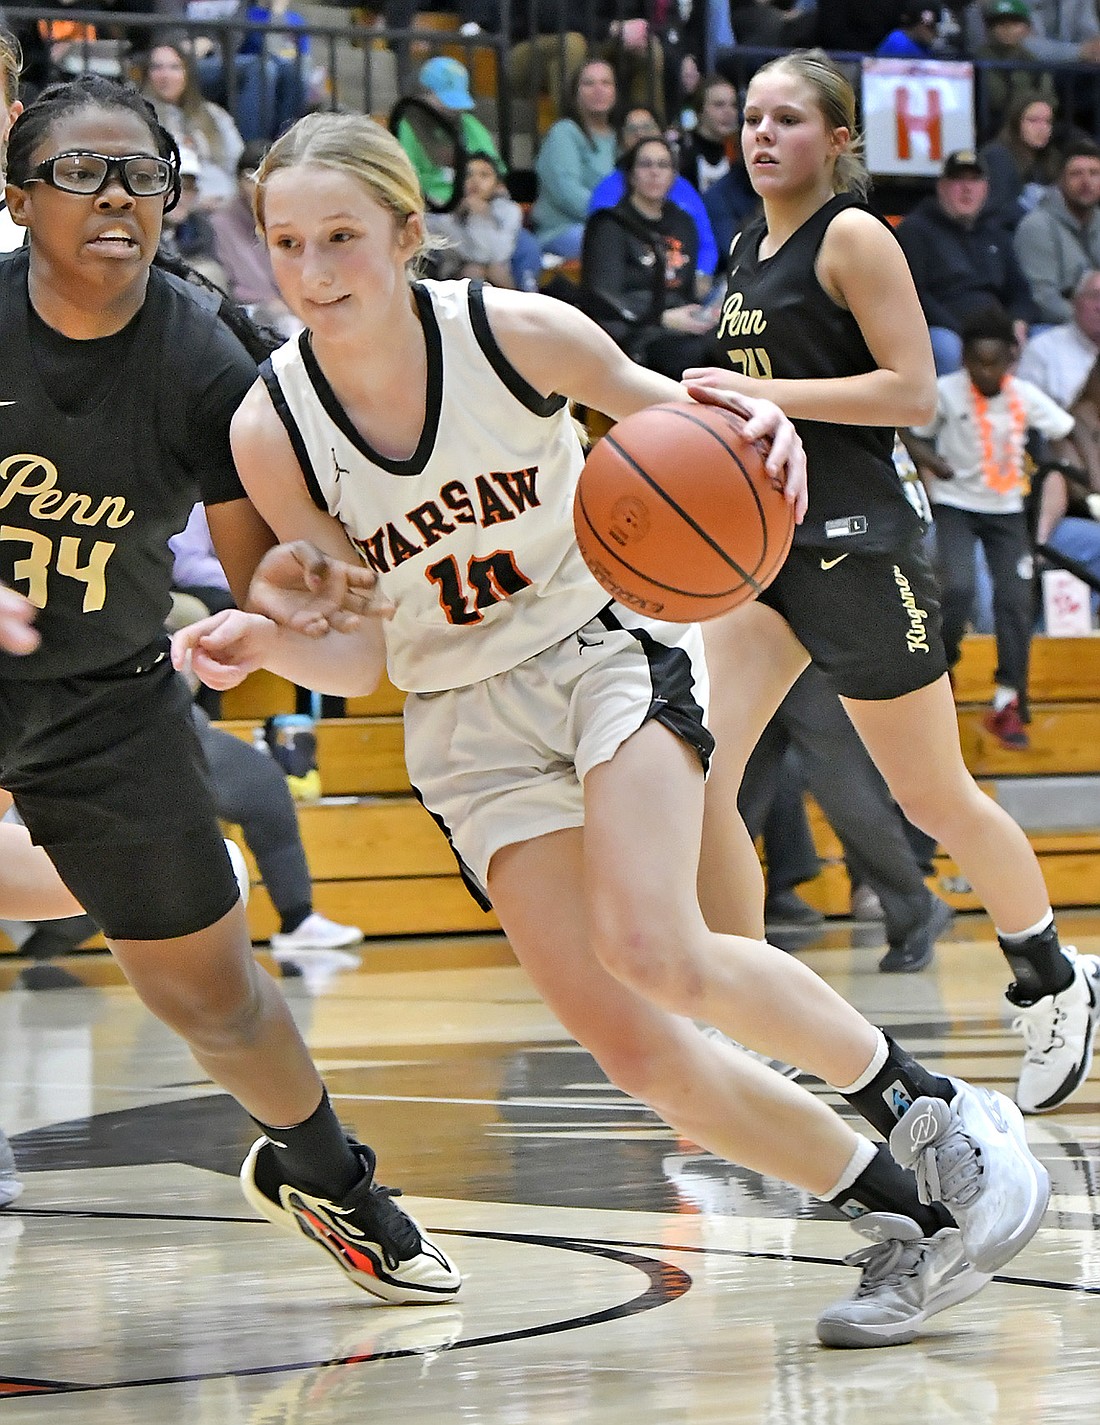 Warsaw sophomore Joslyn Bricker drives to the basket during the second quarter of Tuesday night's home game against Penn. Photo by Gary Nieter